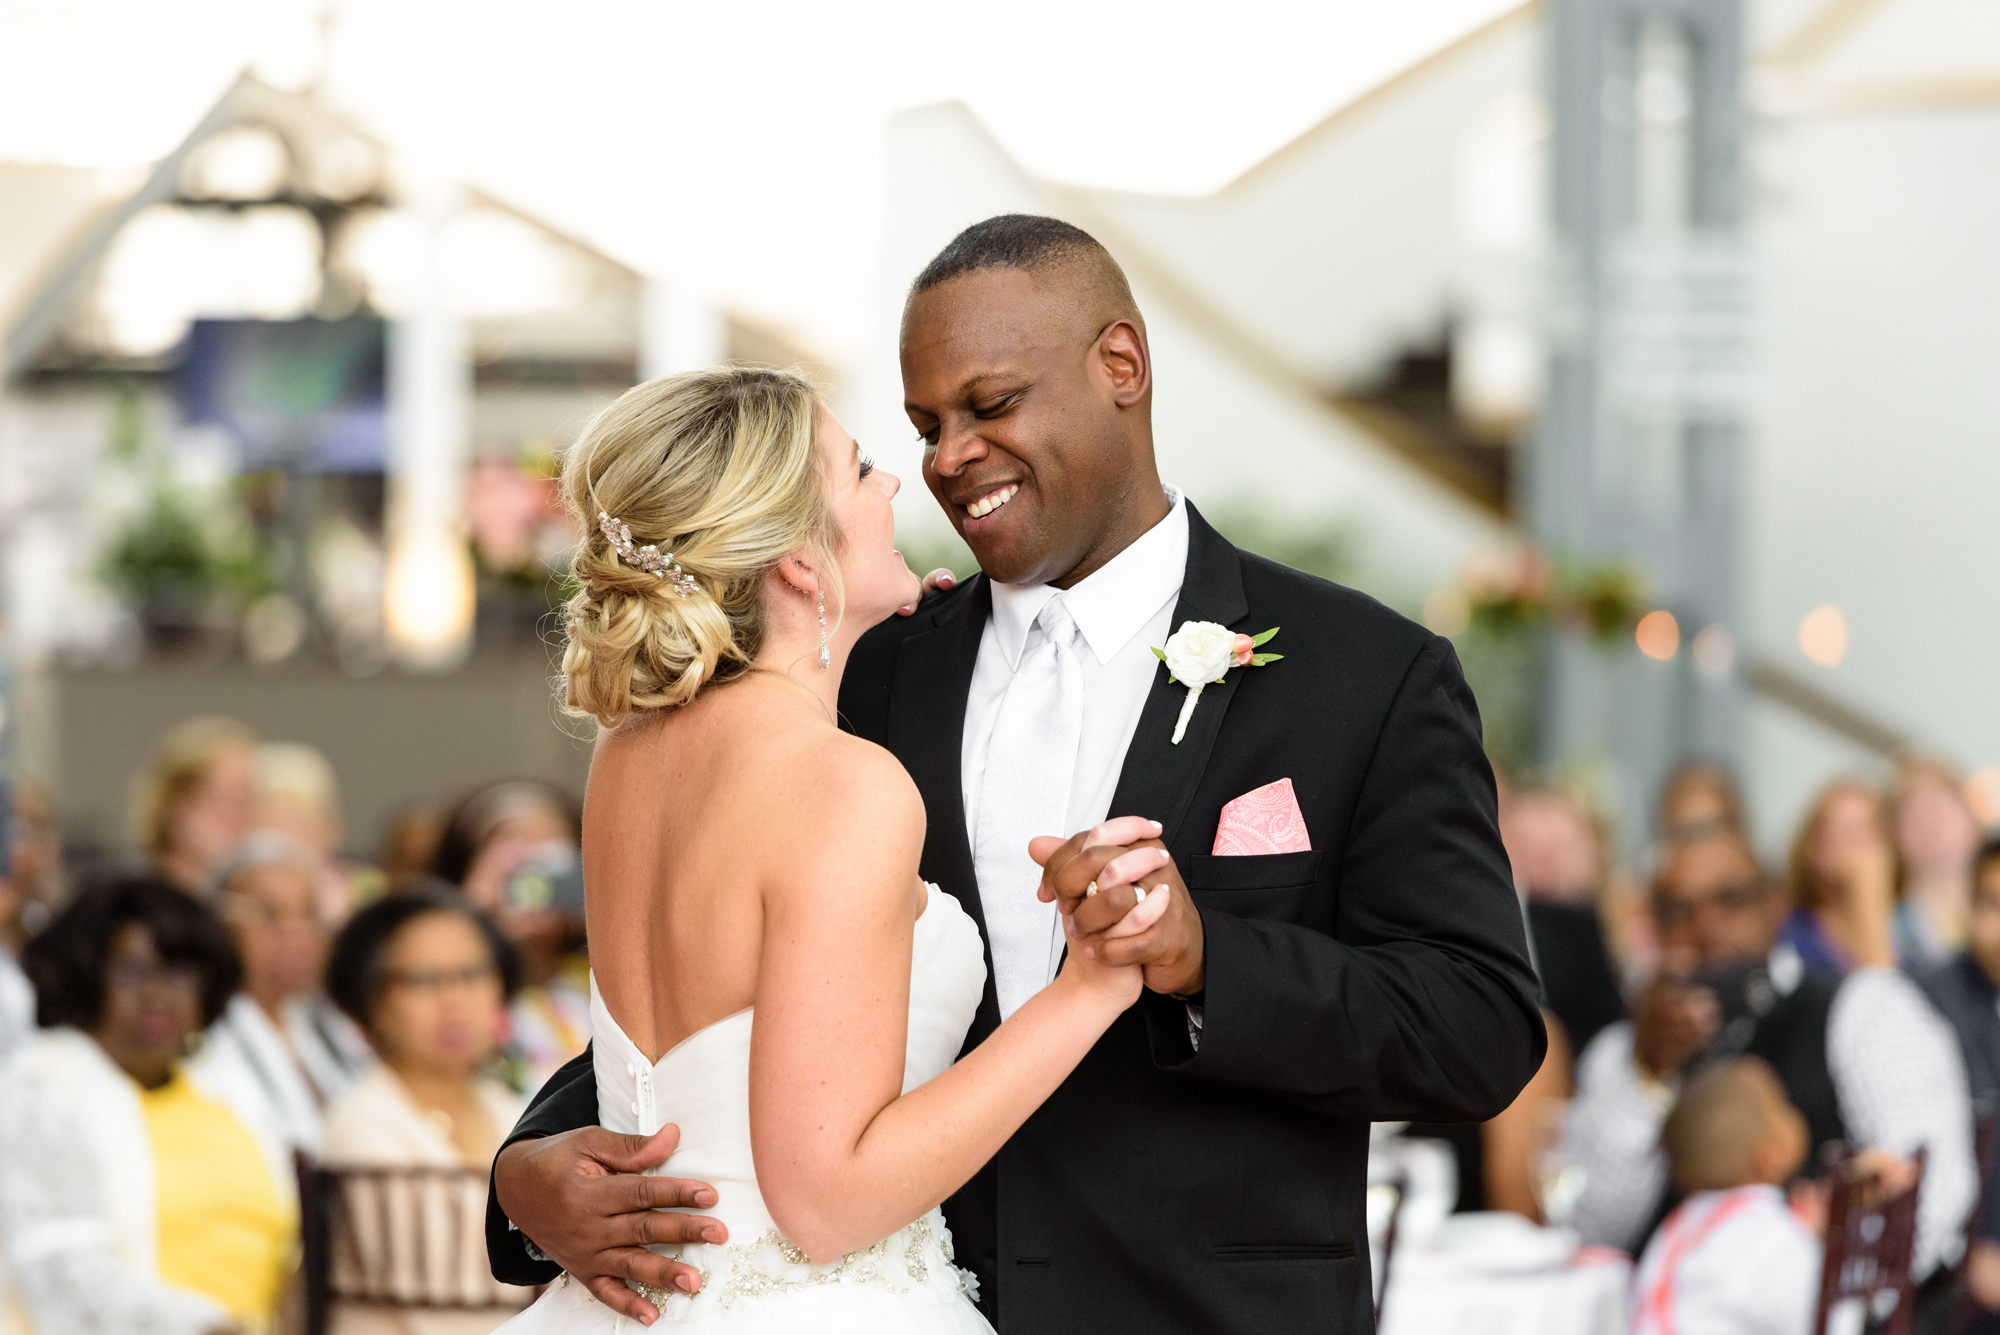 Bride & Groom’s first dance at a Wedding Reception at the DoubleTree by Hilton South Bend